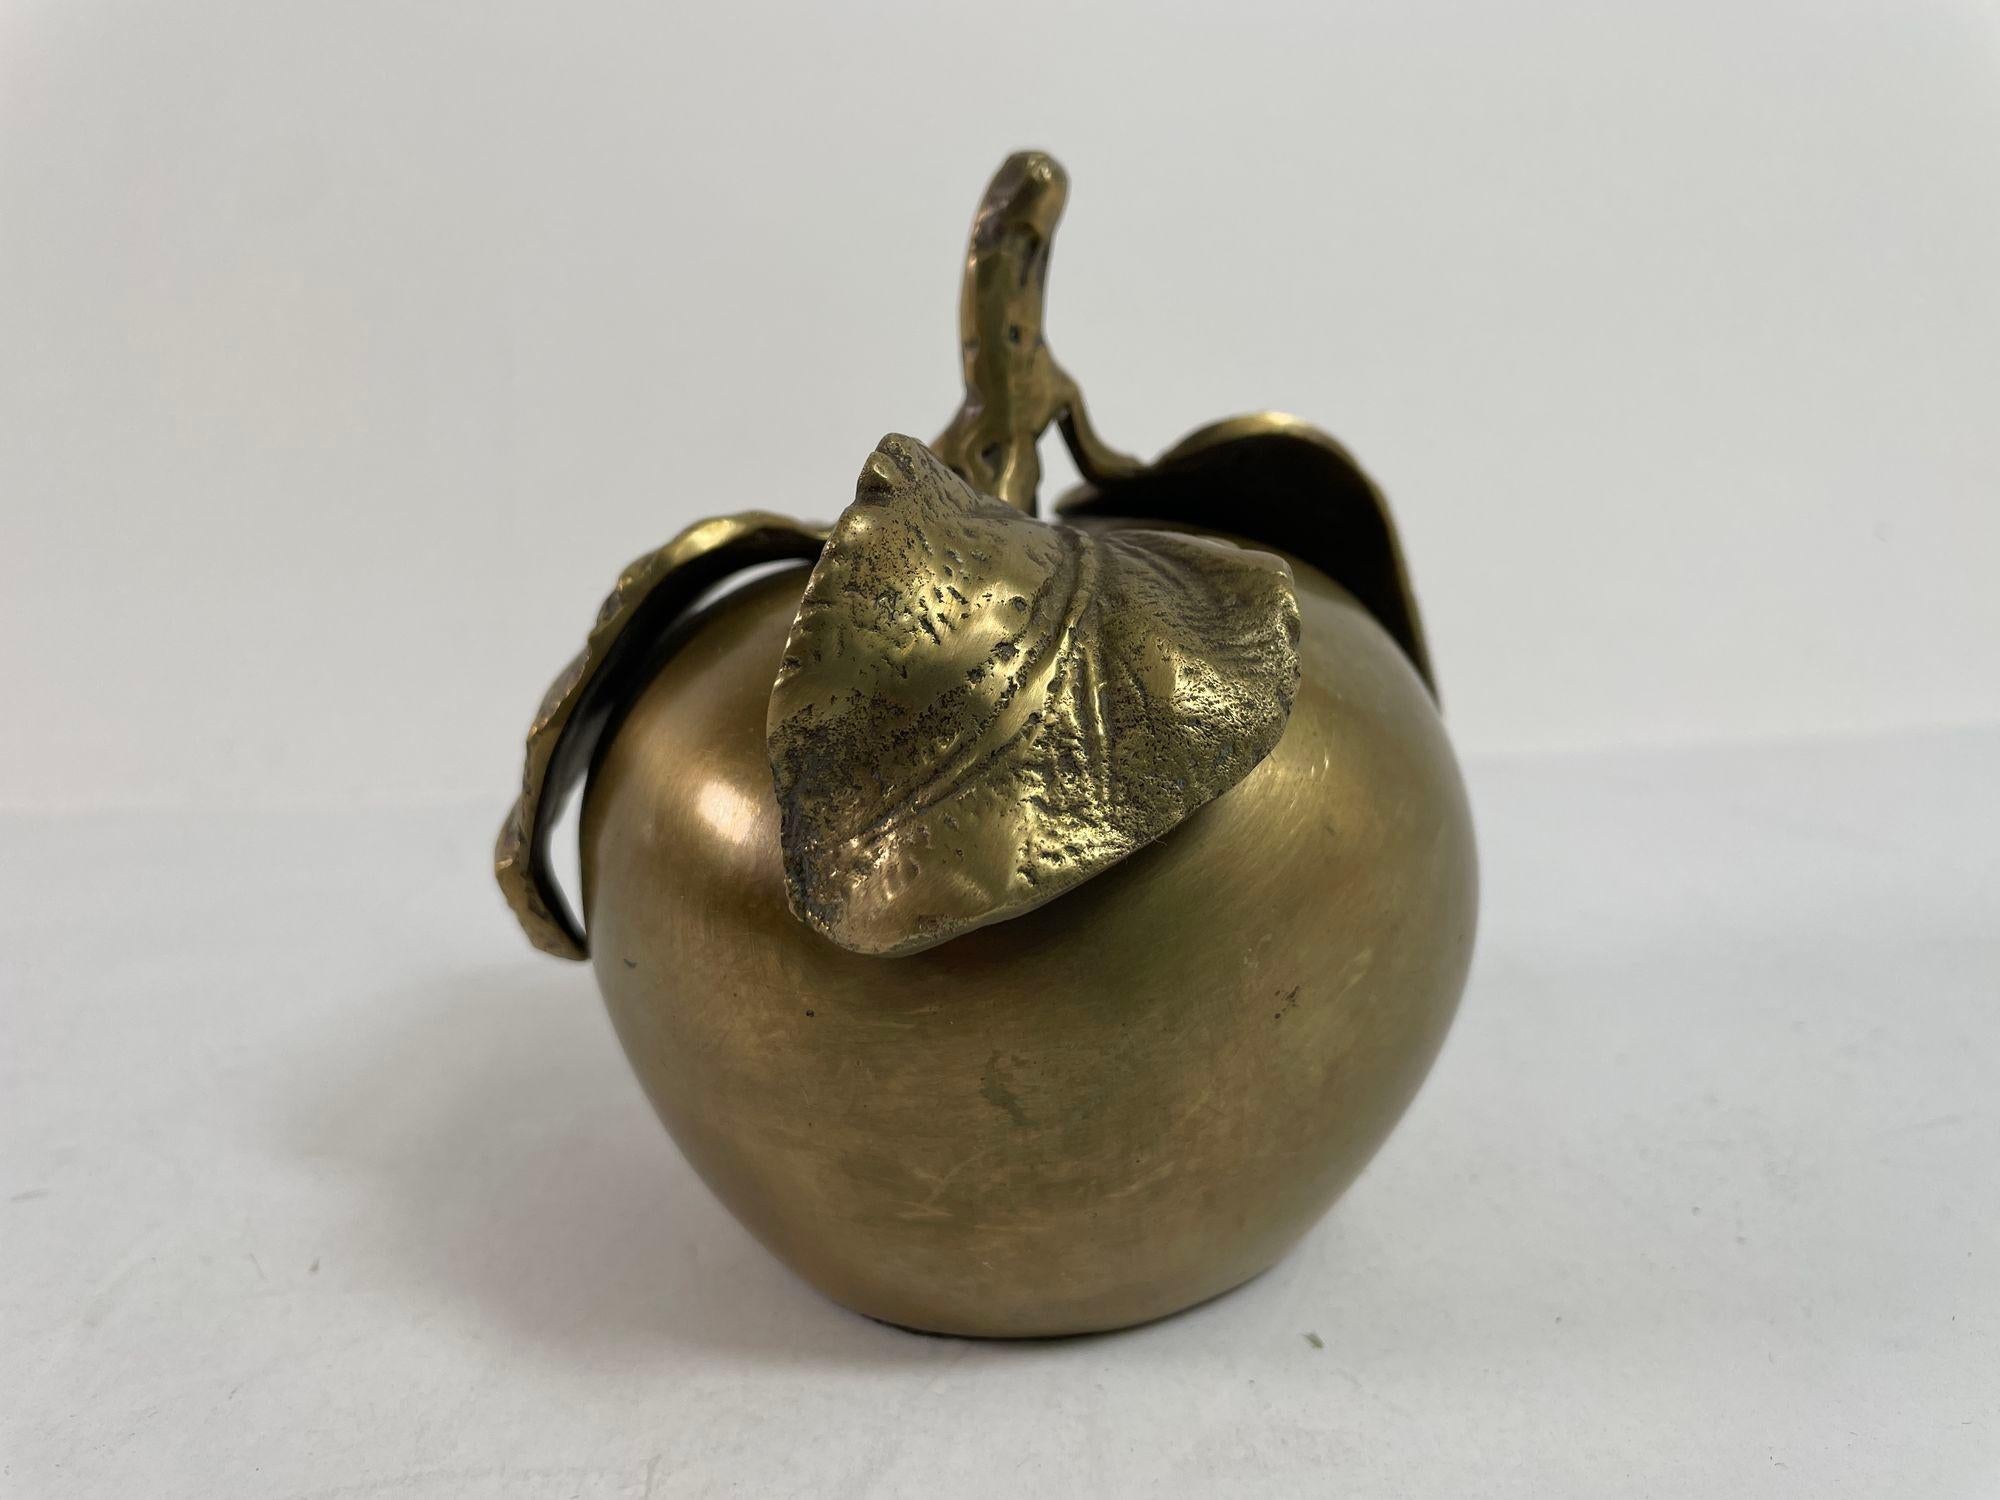 French Vintage Brass Apple Sculpture Paperweight For Sale